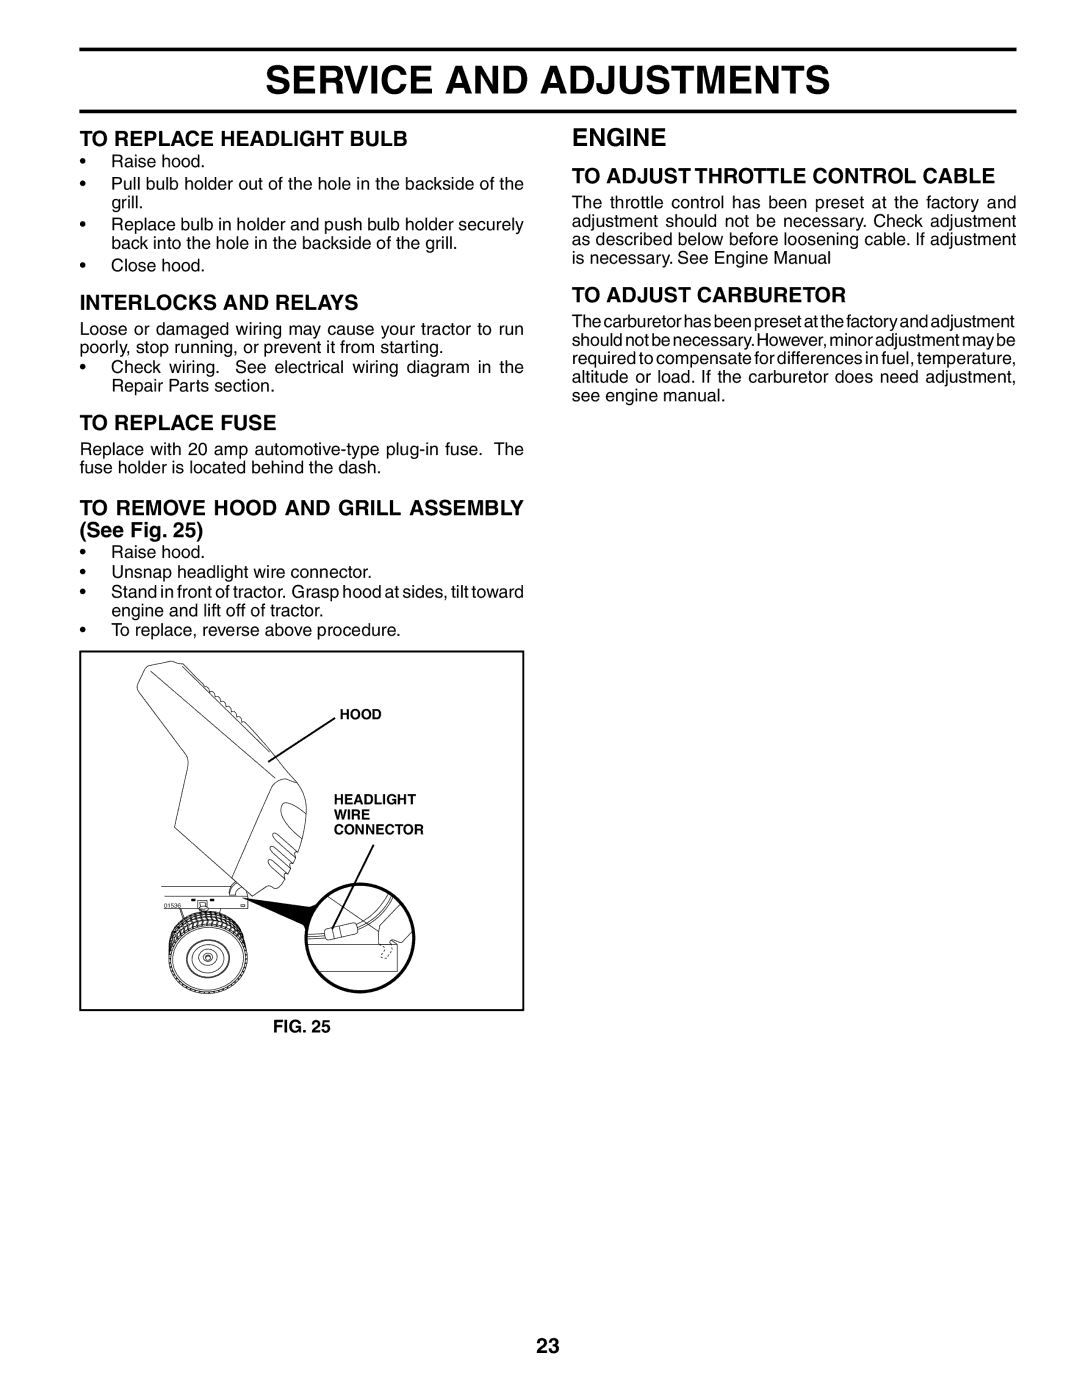 Poulan 187007 manual To Replace Headlight Bulb, Interlocks and Relays, To Replace Fuse, To Adjust Throttle Control Cable 